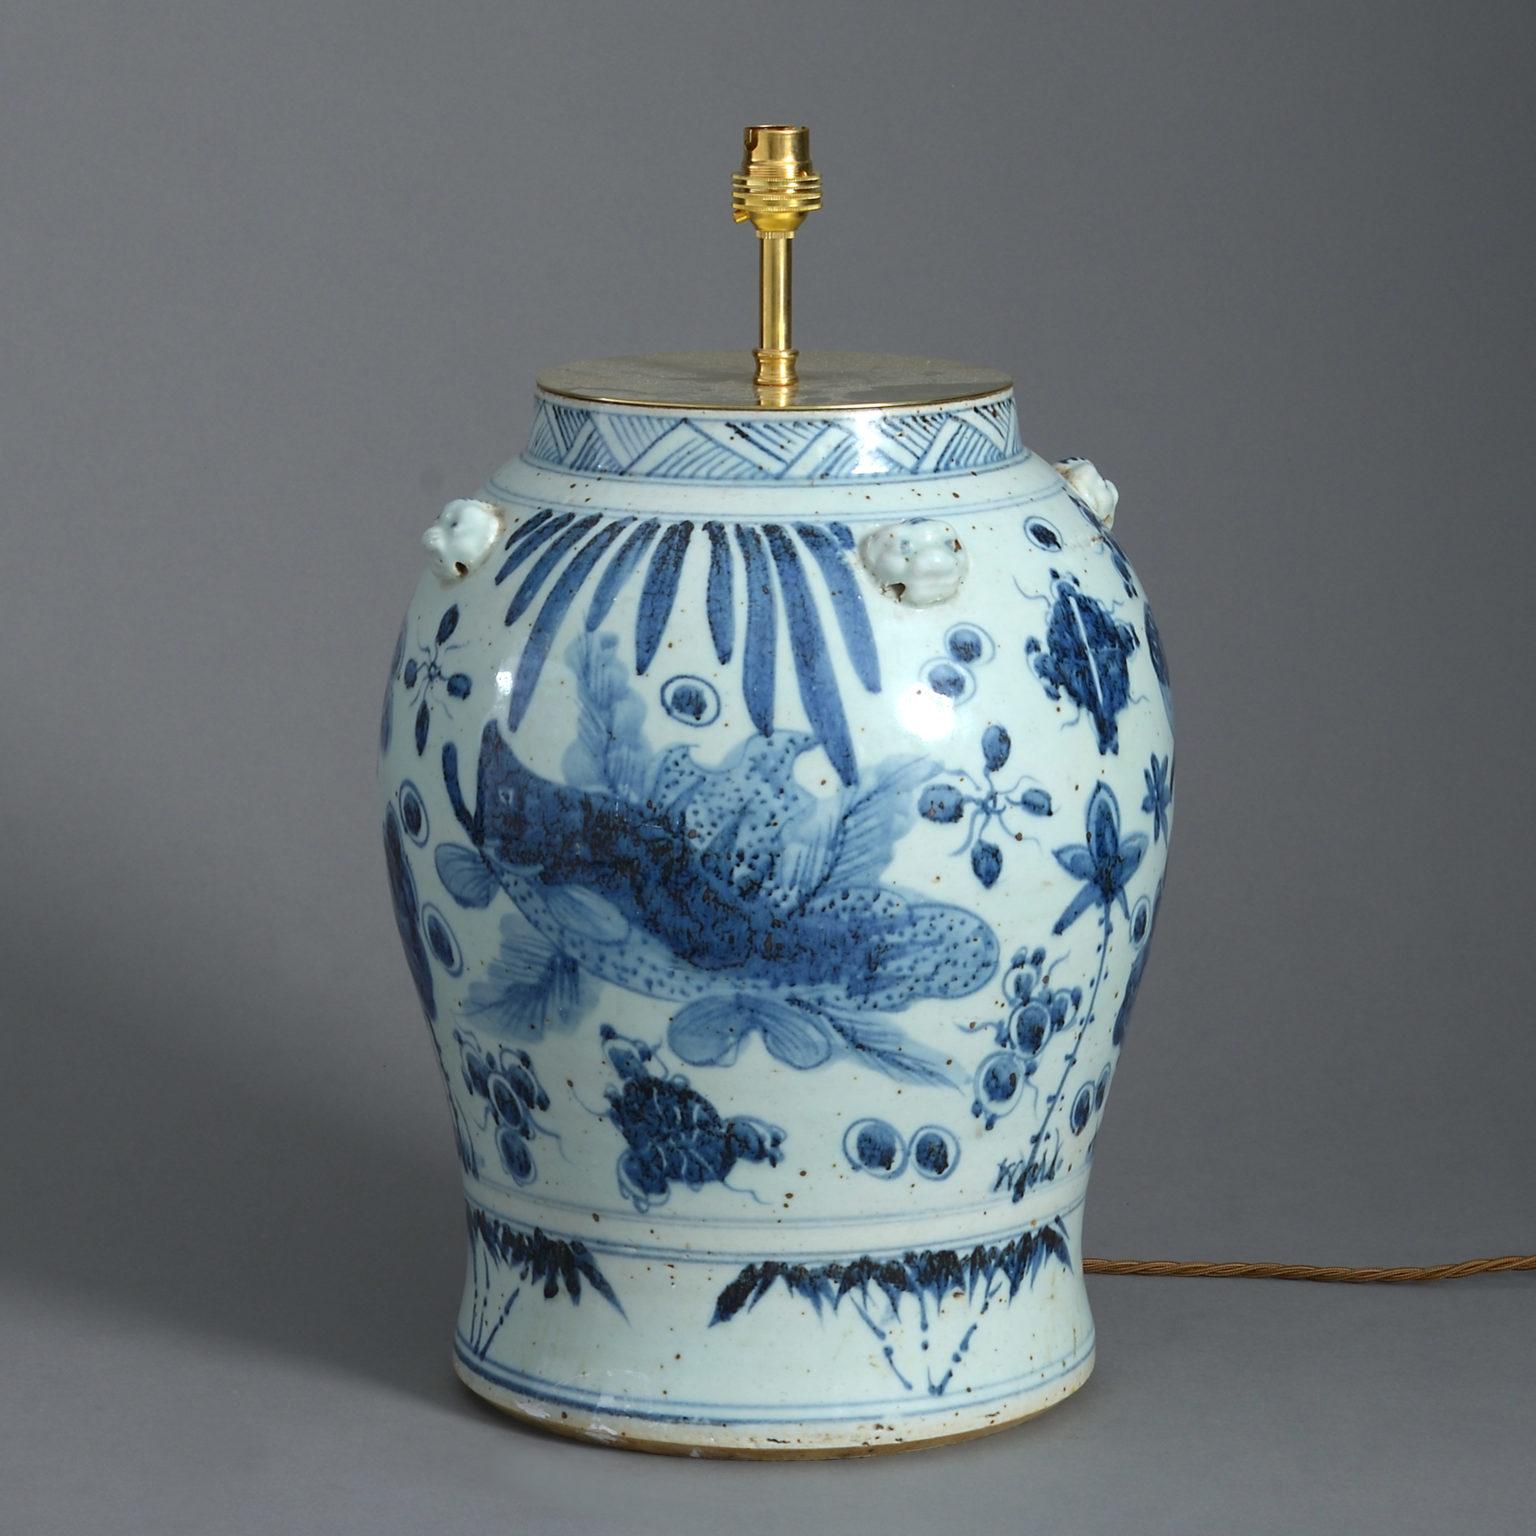 A blue and white glazed porcelain vase, of good scale, decorated throughout with fish swimming amongst seaweed.